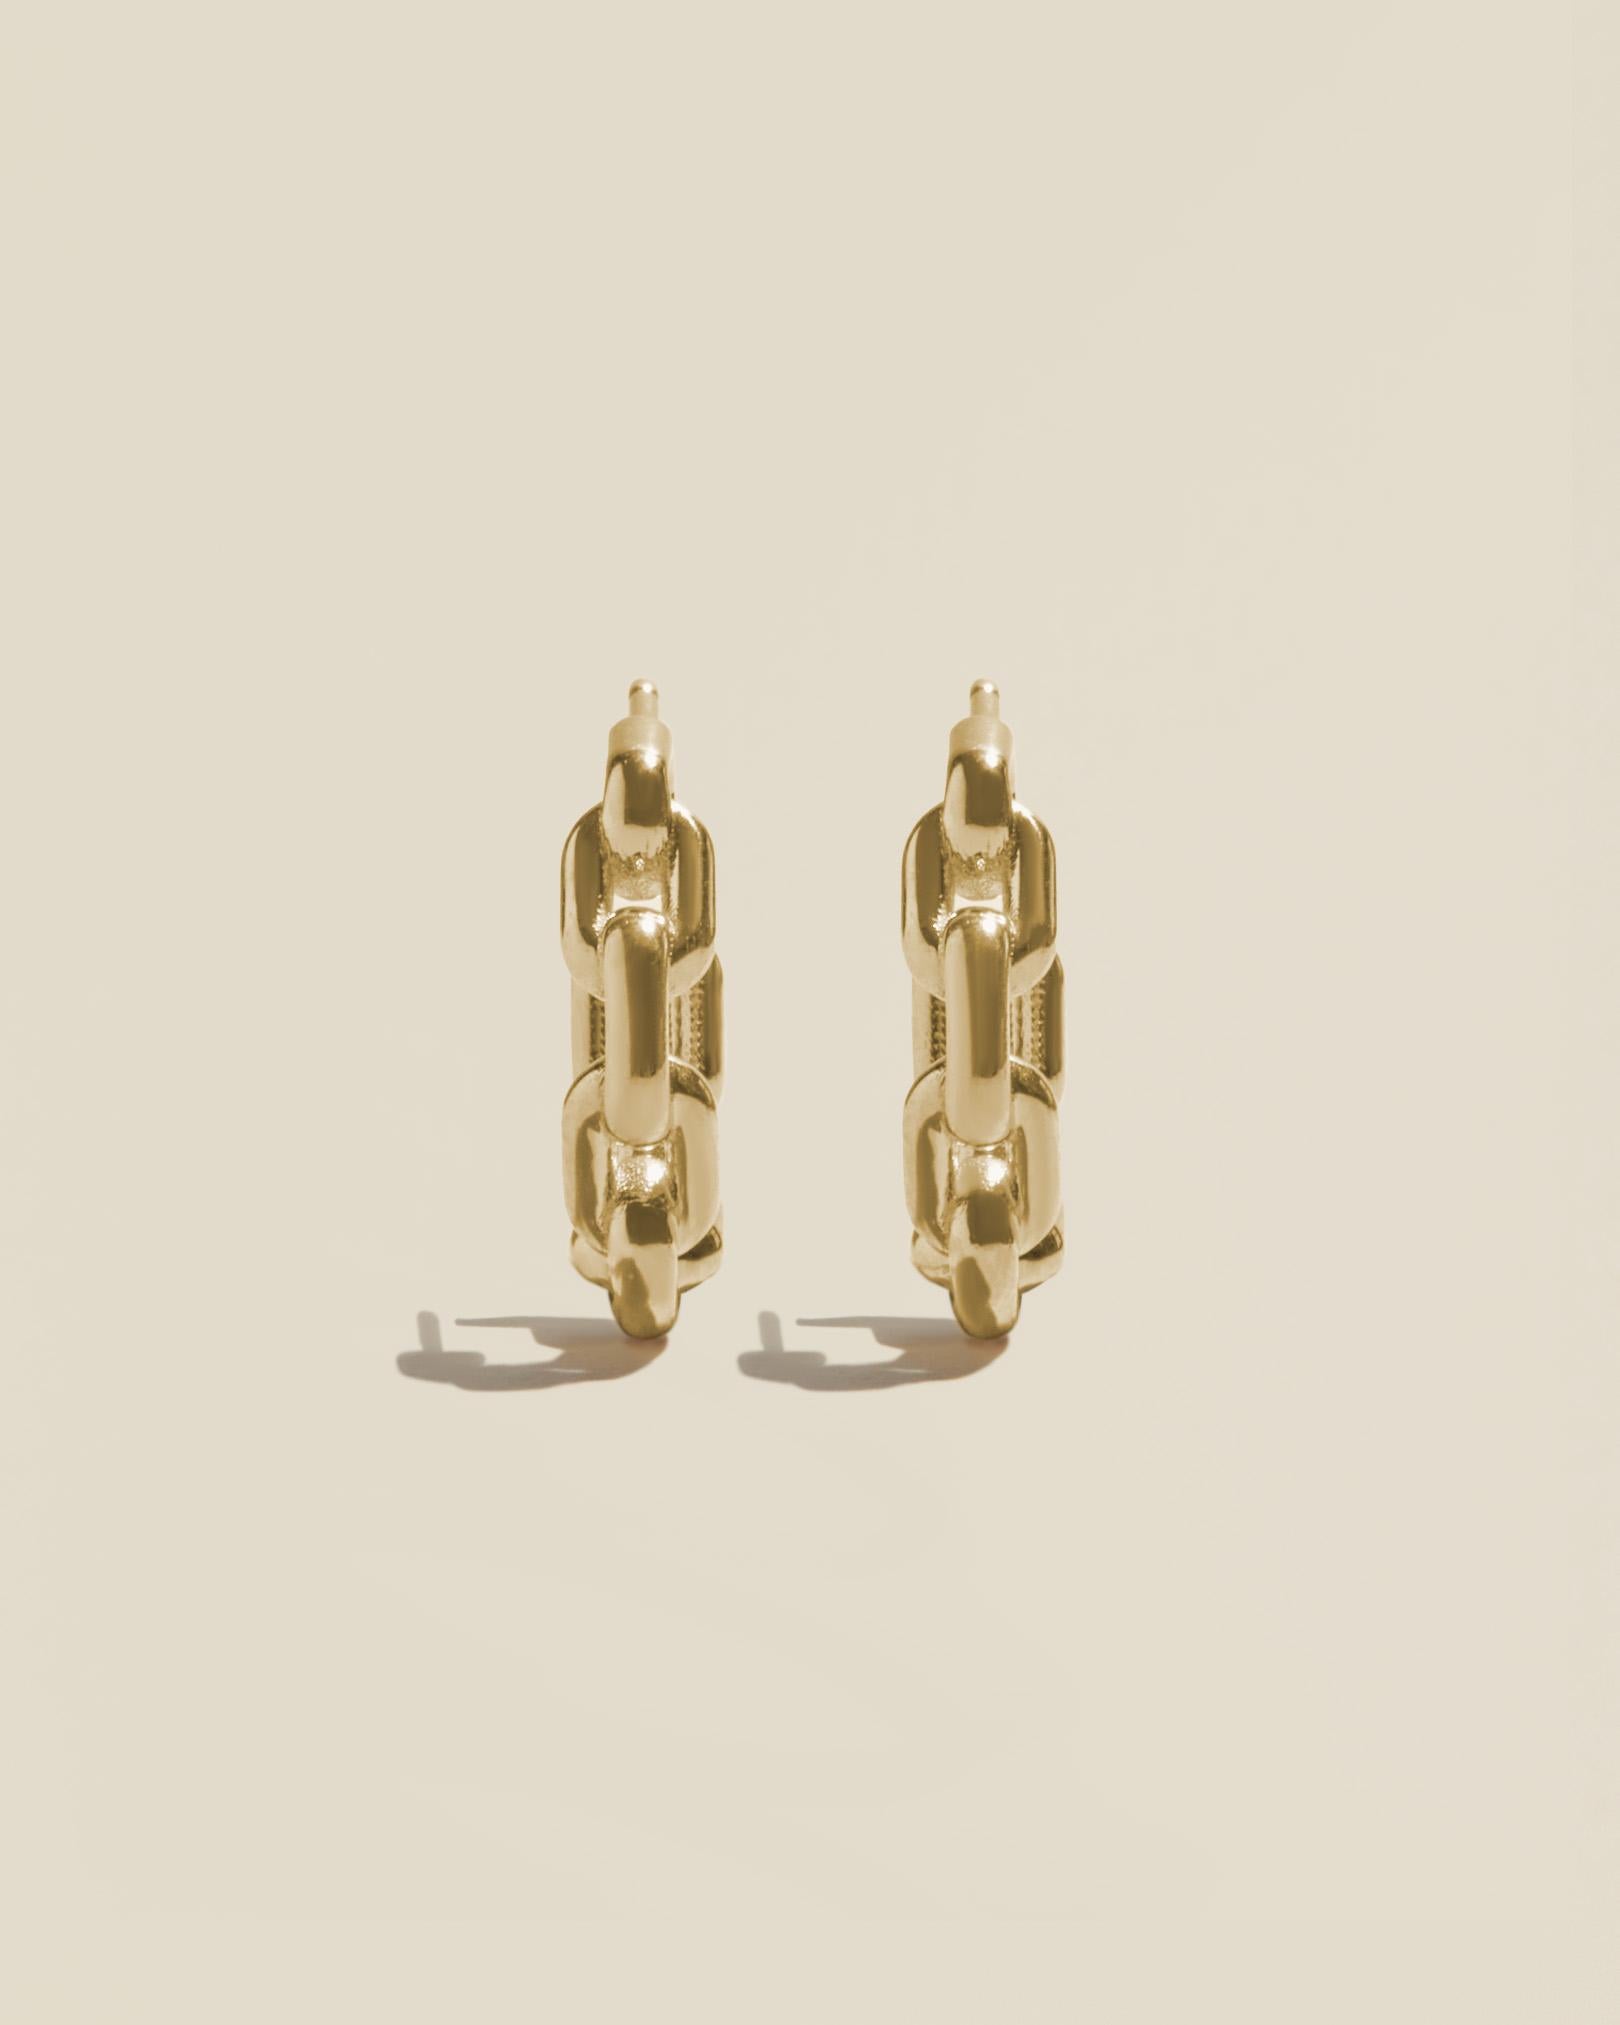 These Stay Linked Earrings are the perfect everyday accessory. Crafted from solid gold, they are hand-polished to ensure a luxurious finish. These earrings will elevate any outfit, making them the perfect addition to your jewelry collection. With